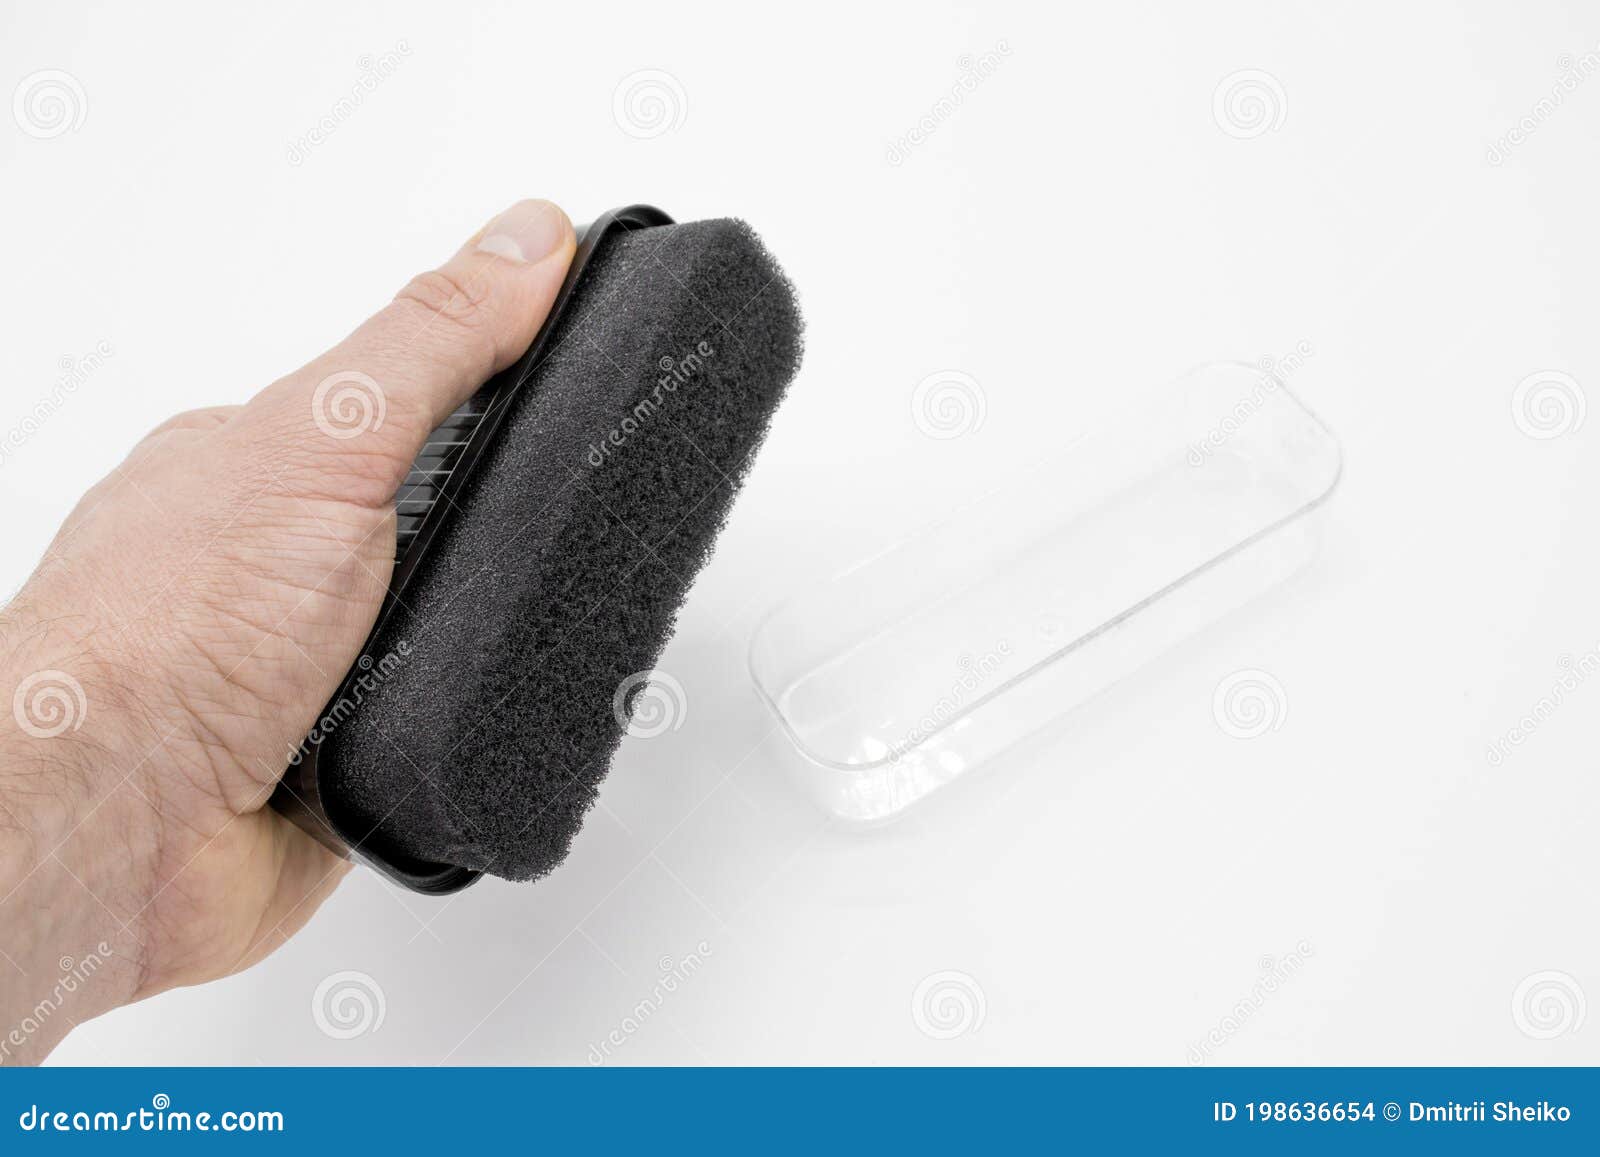 Shoe Cleaning Sponge Isolated on White Background Stock Photo - Image of  cutout, clean: 198636654